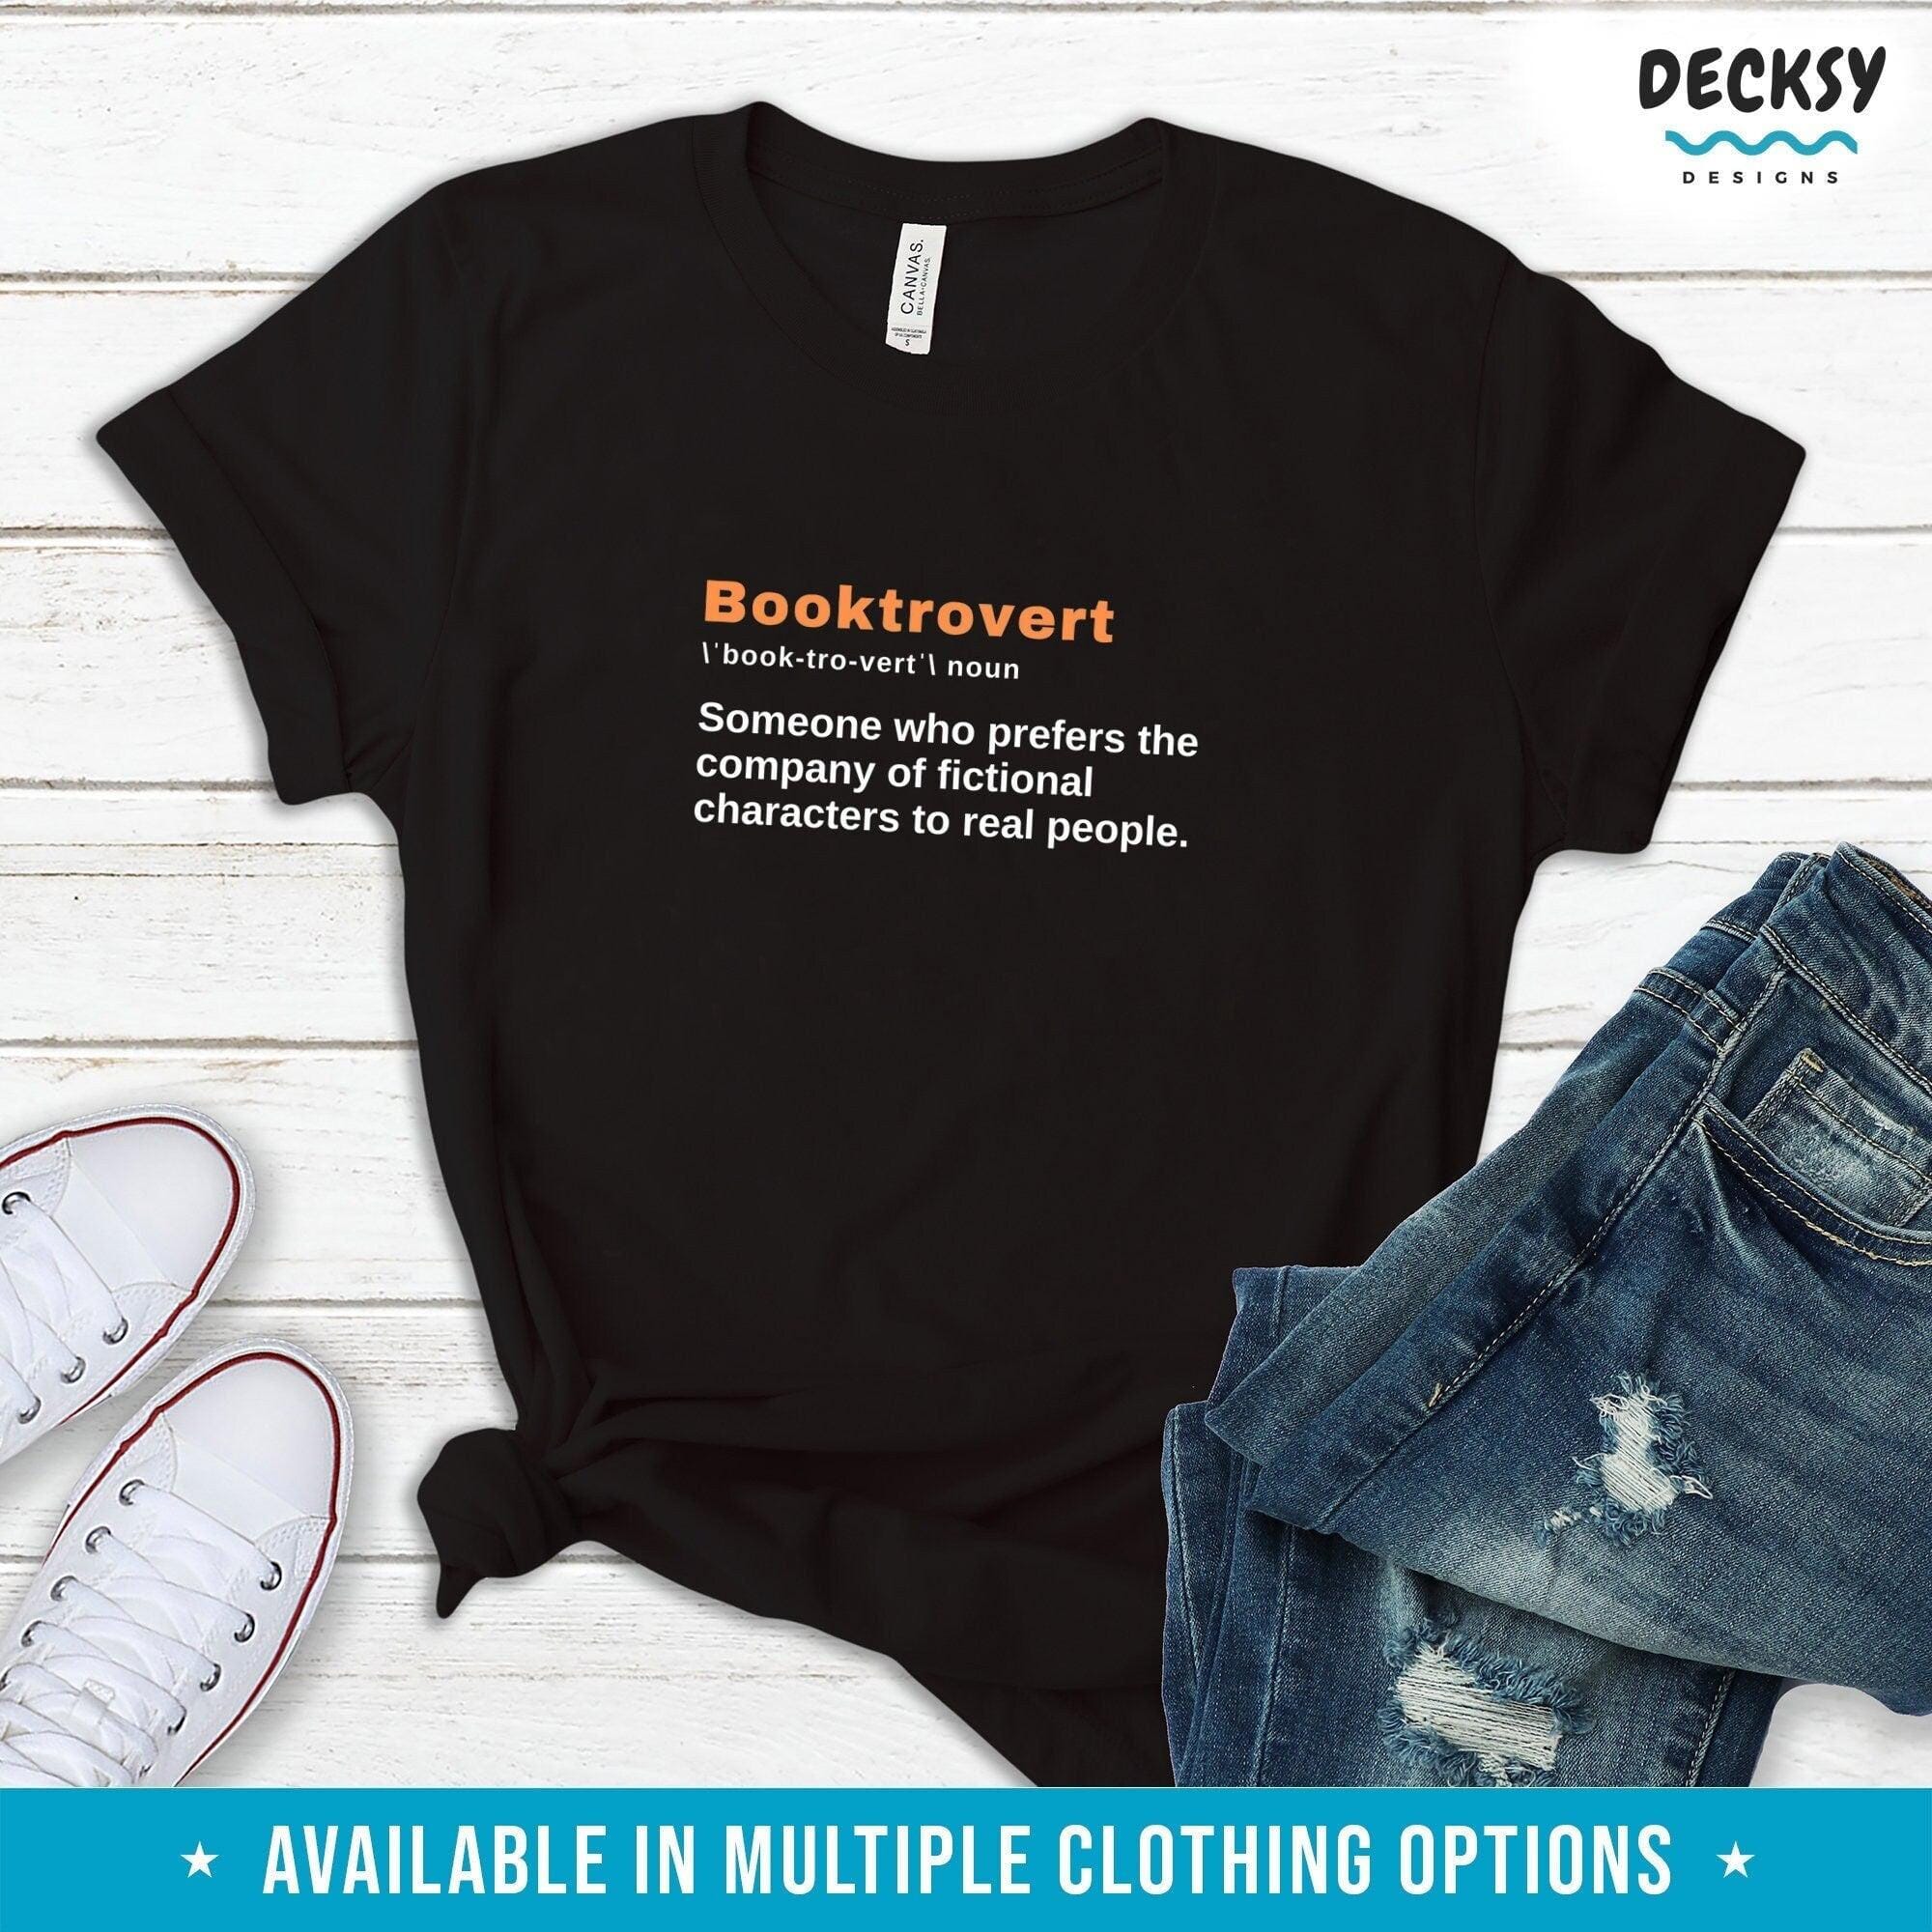 Funny Book Tshirt, Booktrovert Shirt, Book Lover Gift-Clothing:Gender-Neutral Adult Clothing:Tops & Tees:T-shirts:Graphic Tees-DecksyDesigns